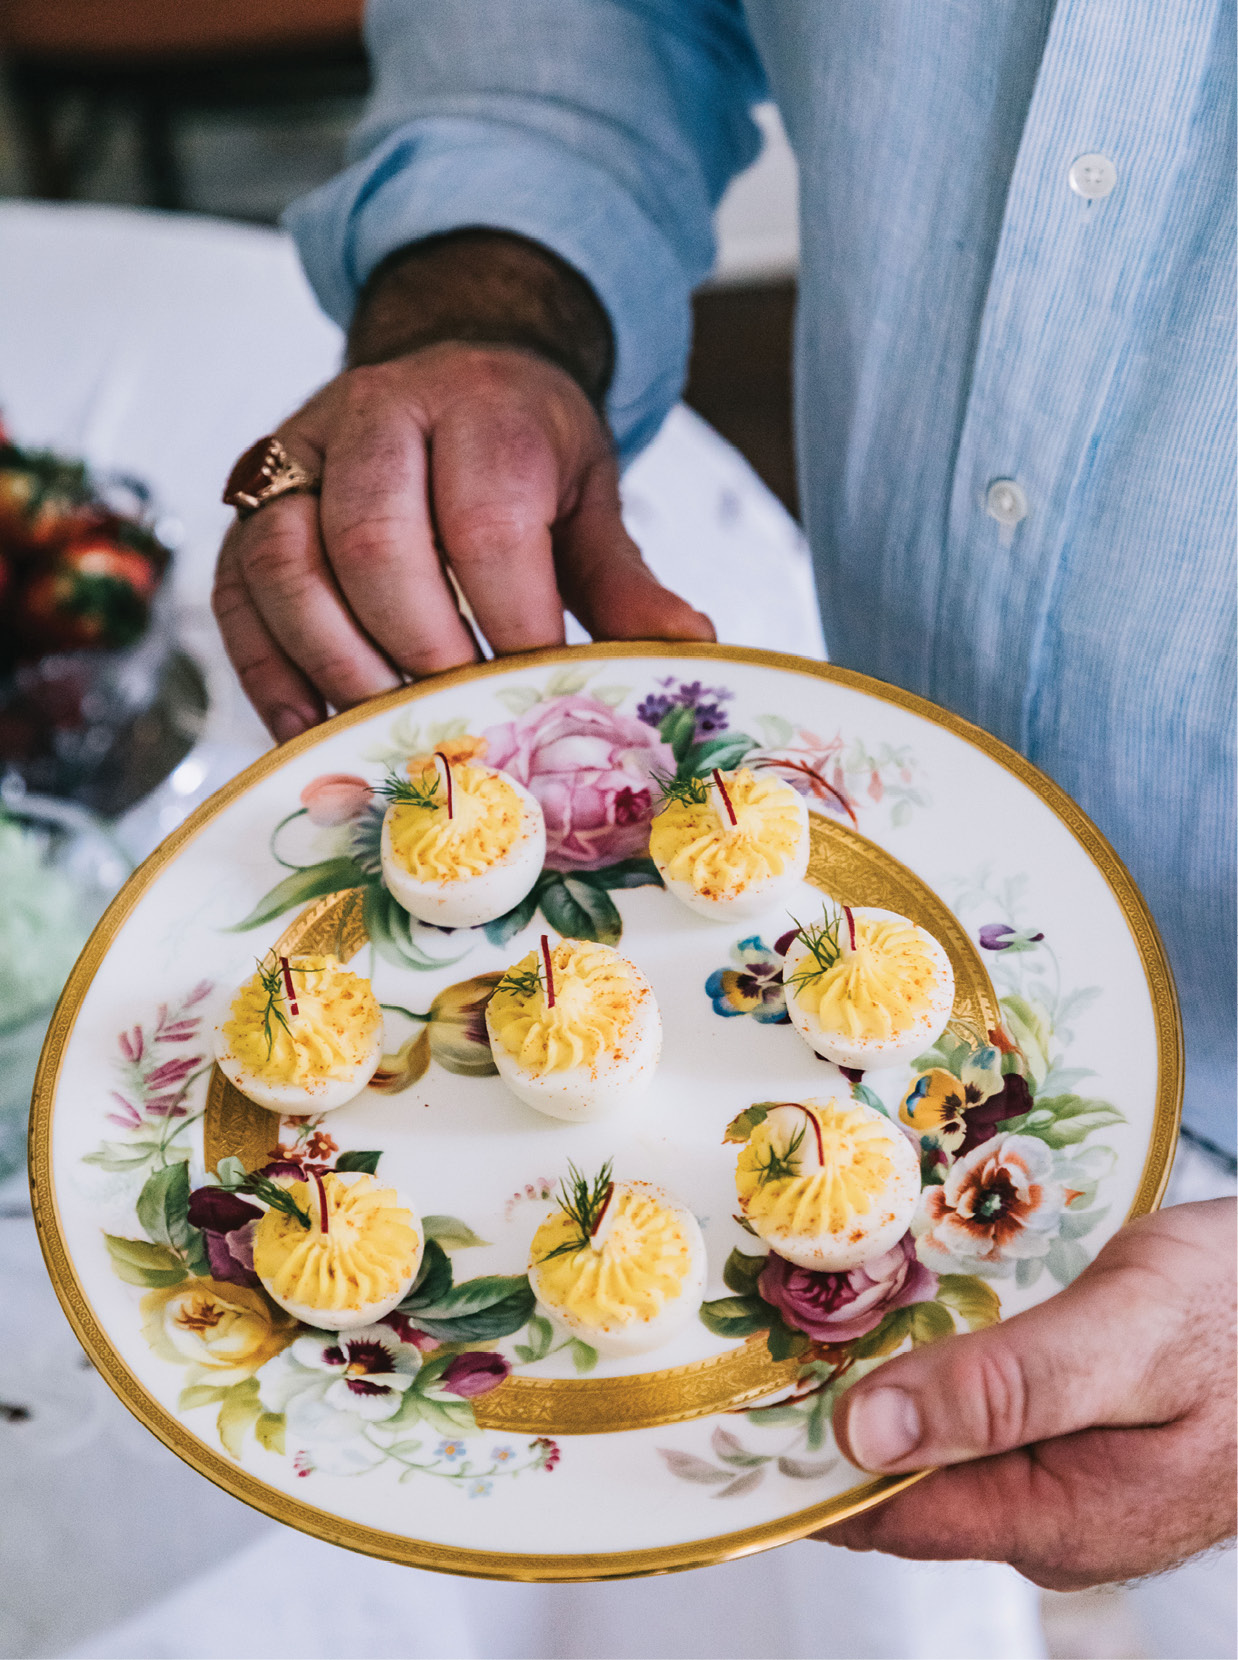 Hand-painted 19th-century English china plates are the perfect vessel for deviled eggs.